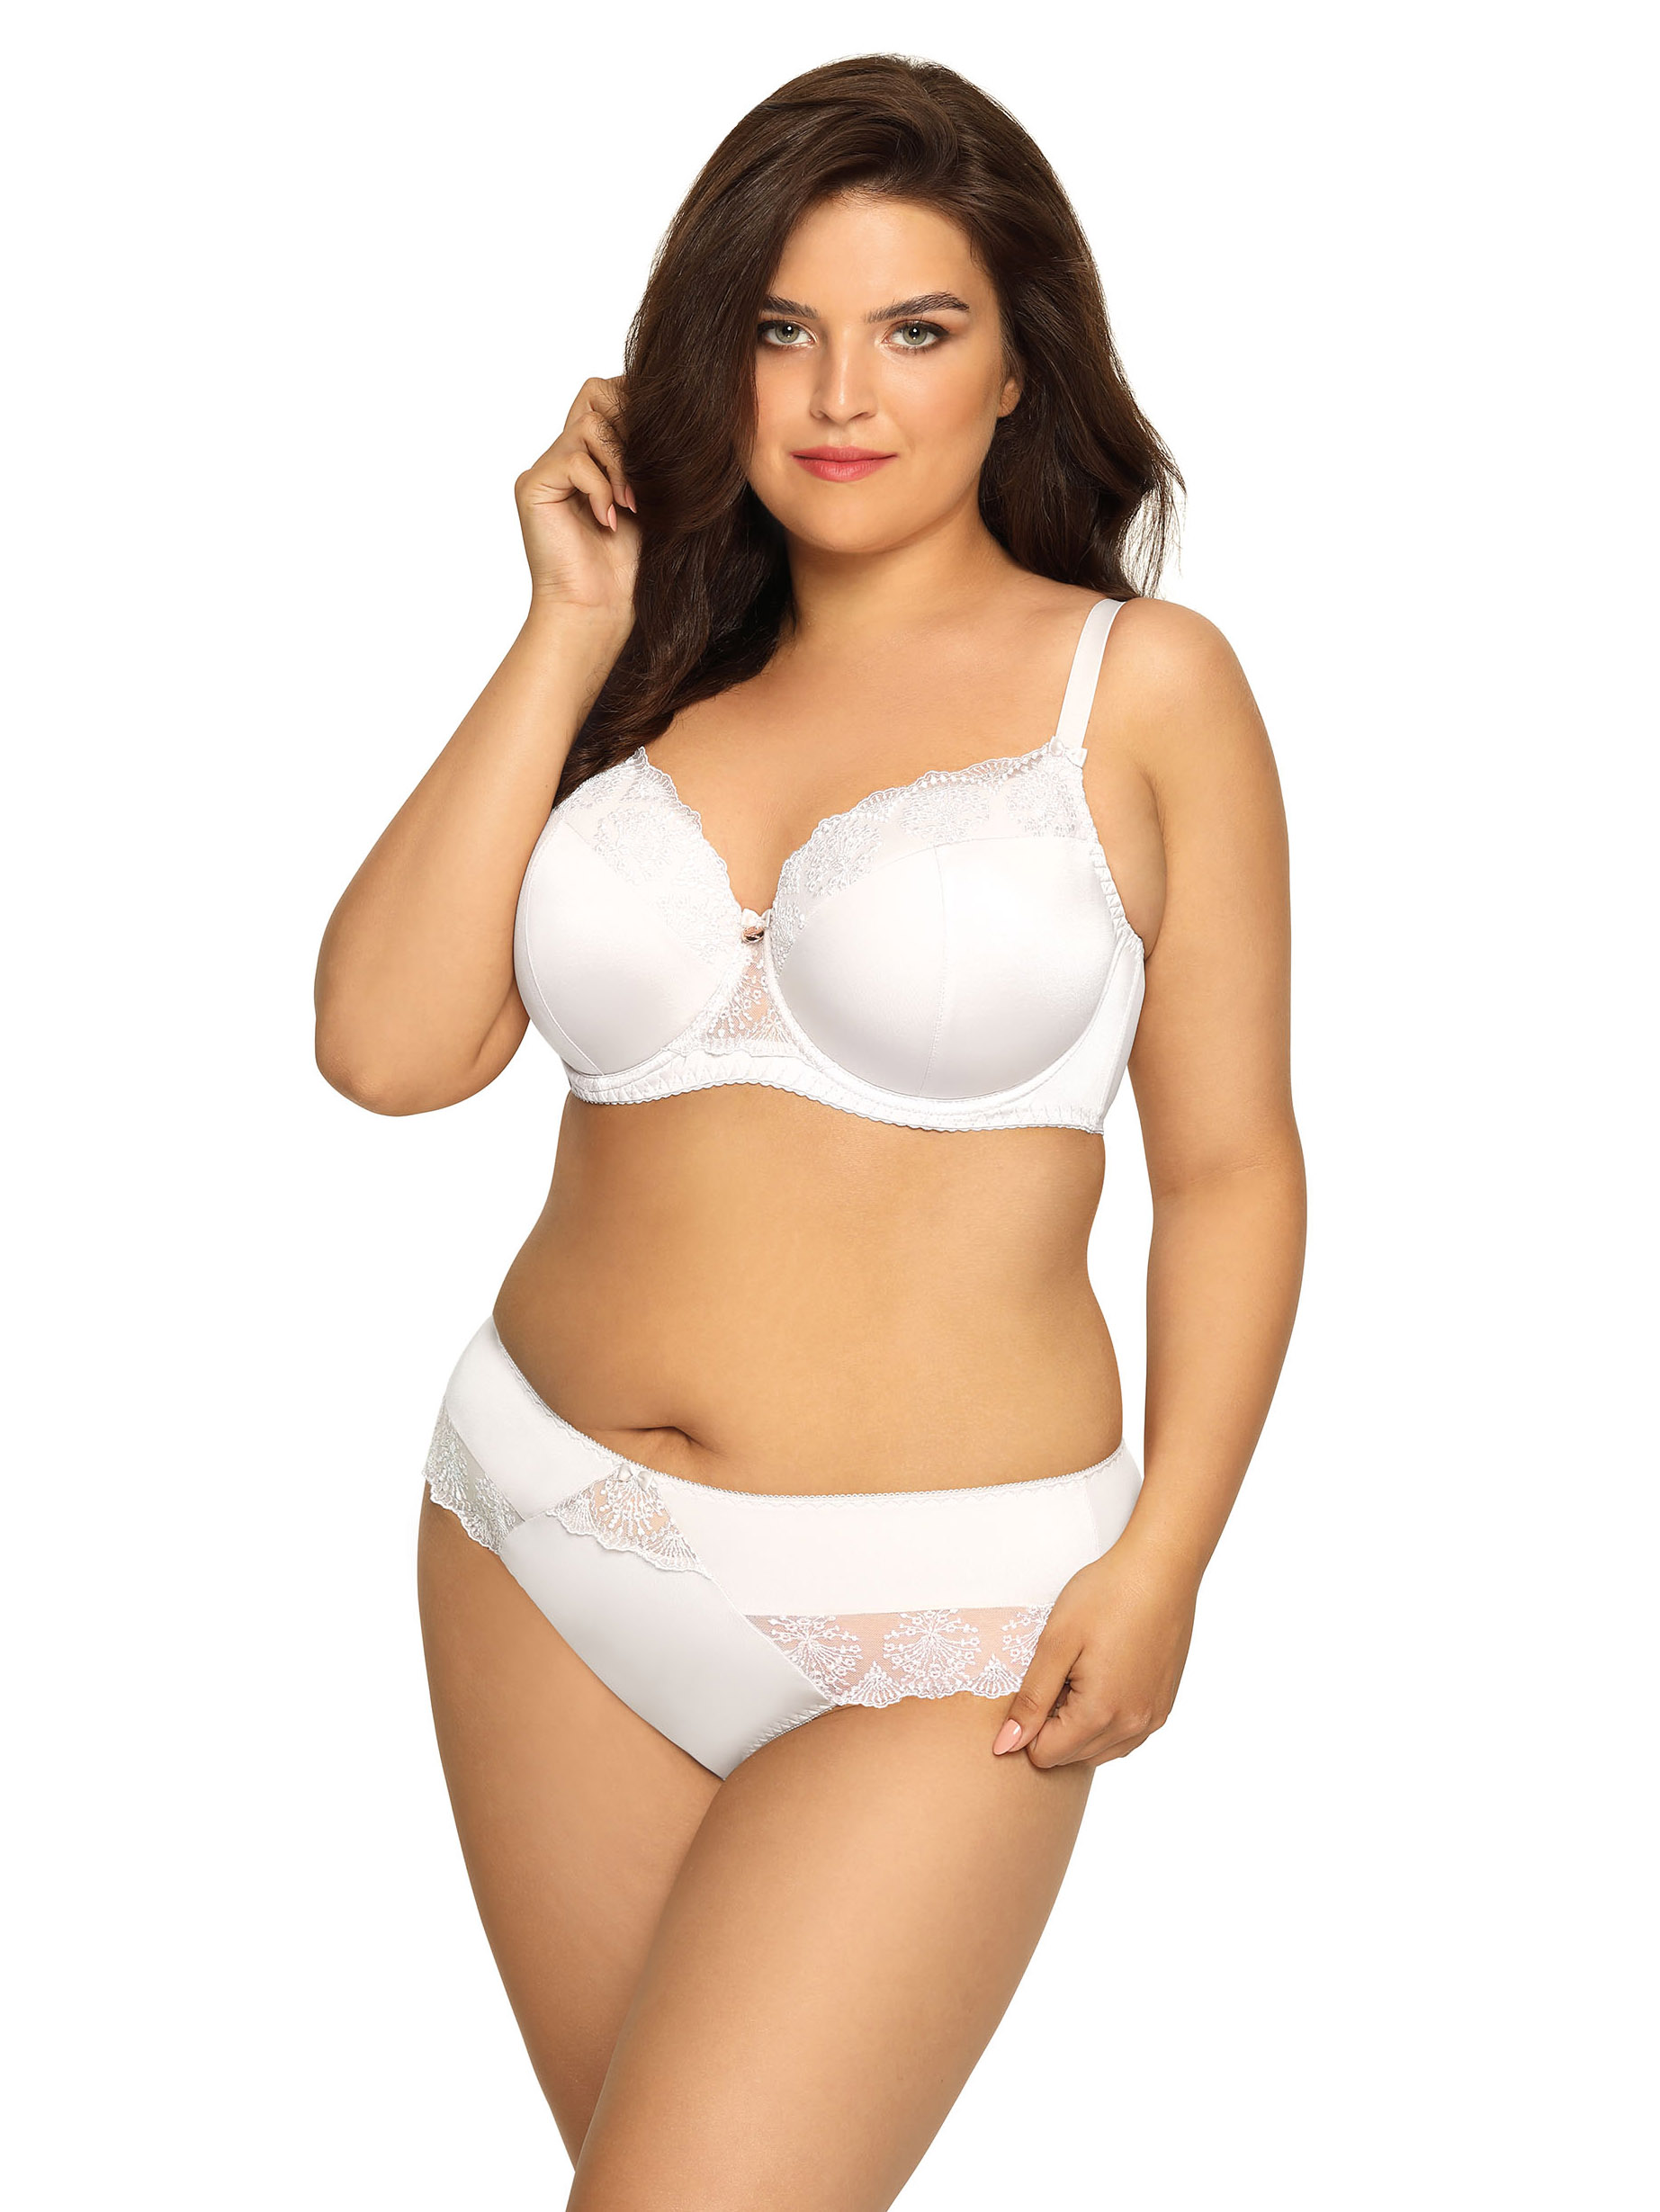 Padded bra with delicate lace Ava 1924 White #2